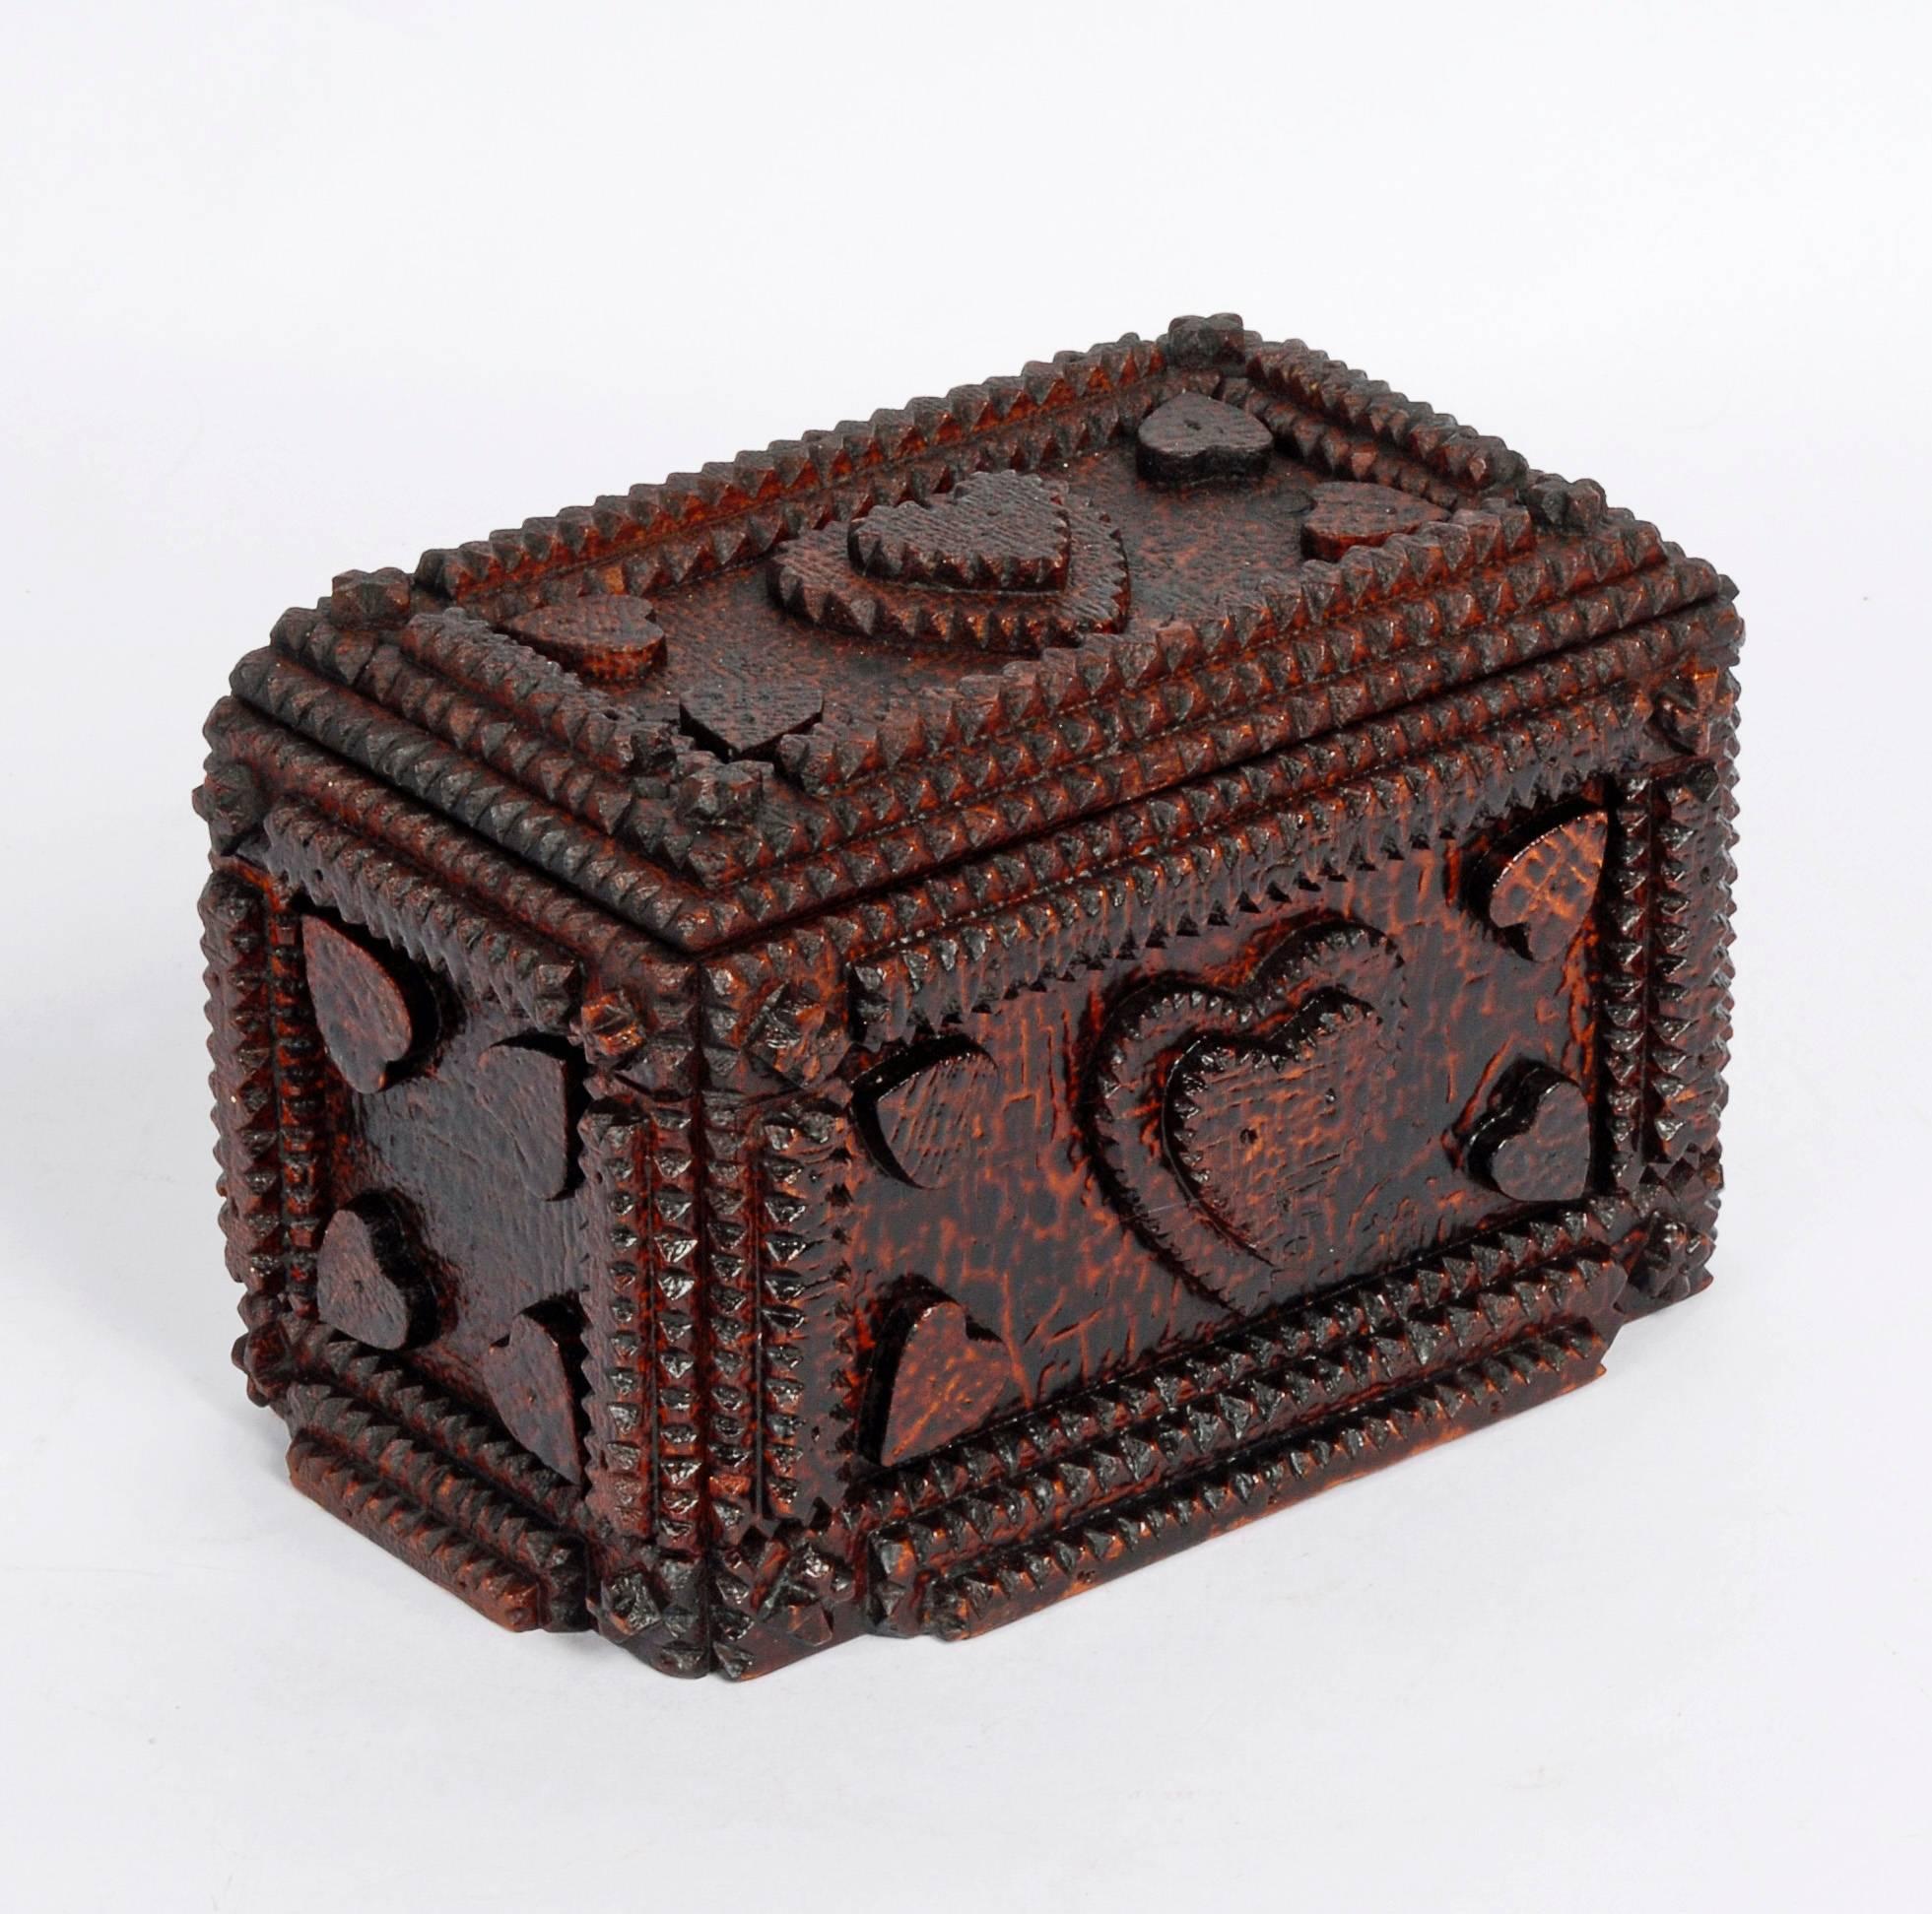 A petite Tramp Art box embellished with numerous hearts and a desirable crazed finish. It was perhaps given as a gift to someone special. The use of hearts in Tramp Art attests to the artist’s drive to make objects having a deep emotional